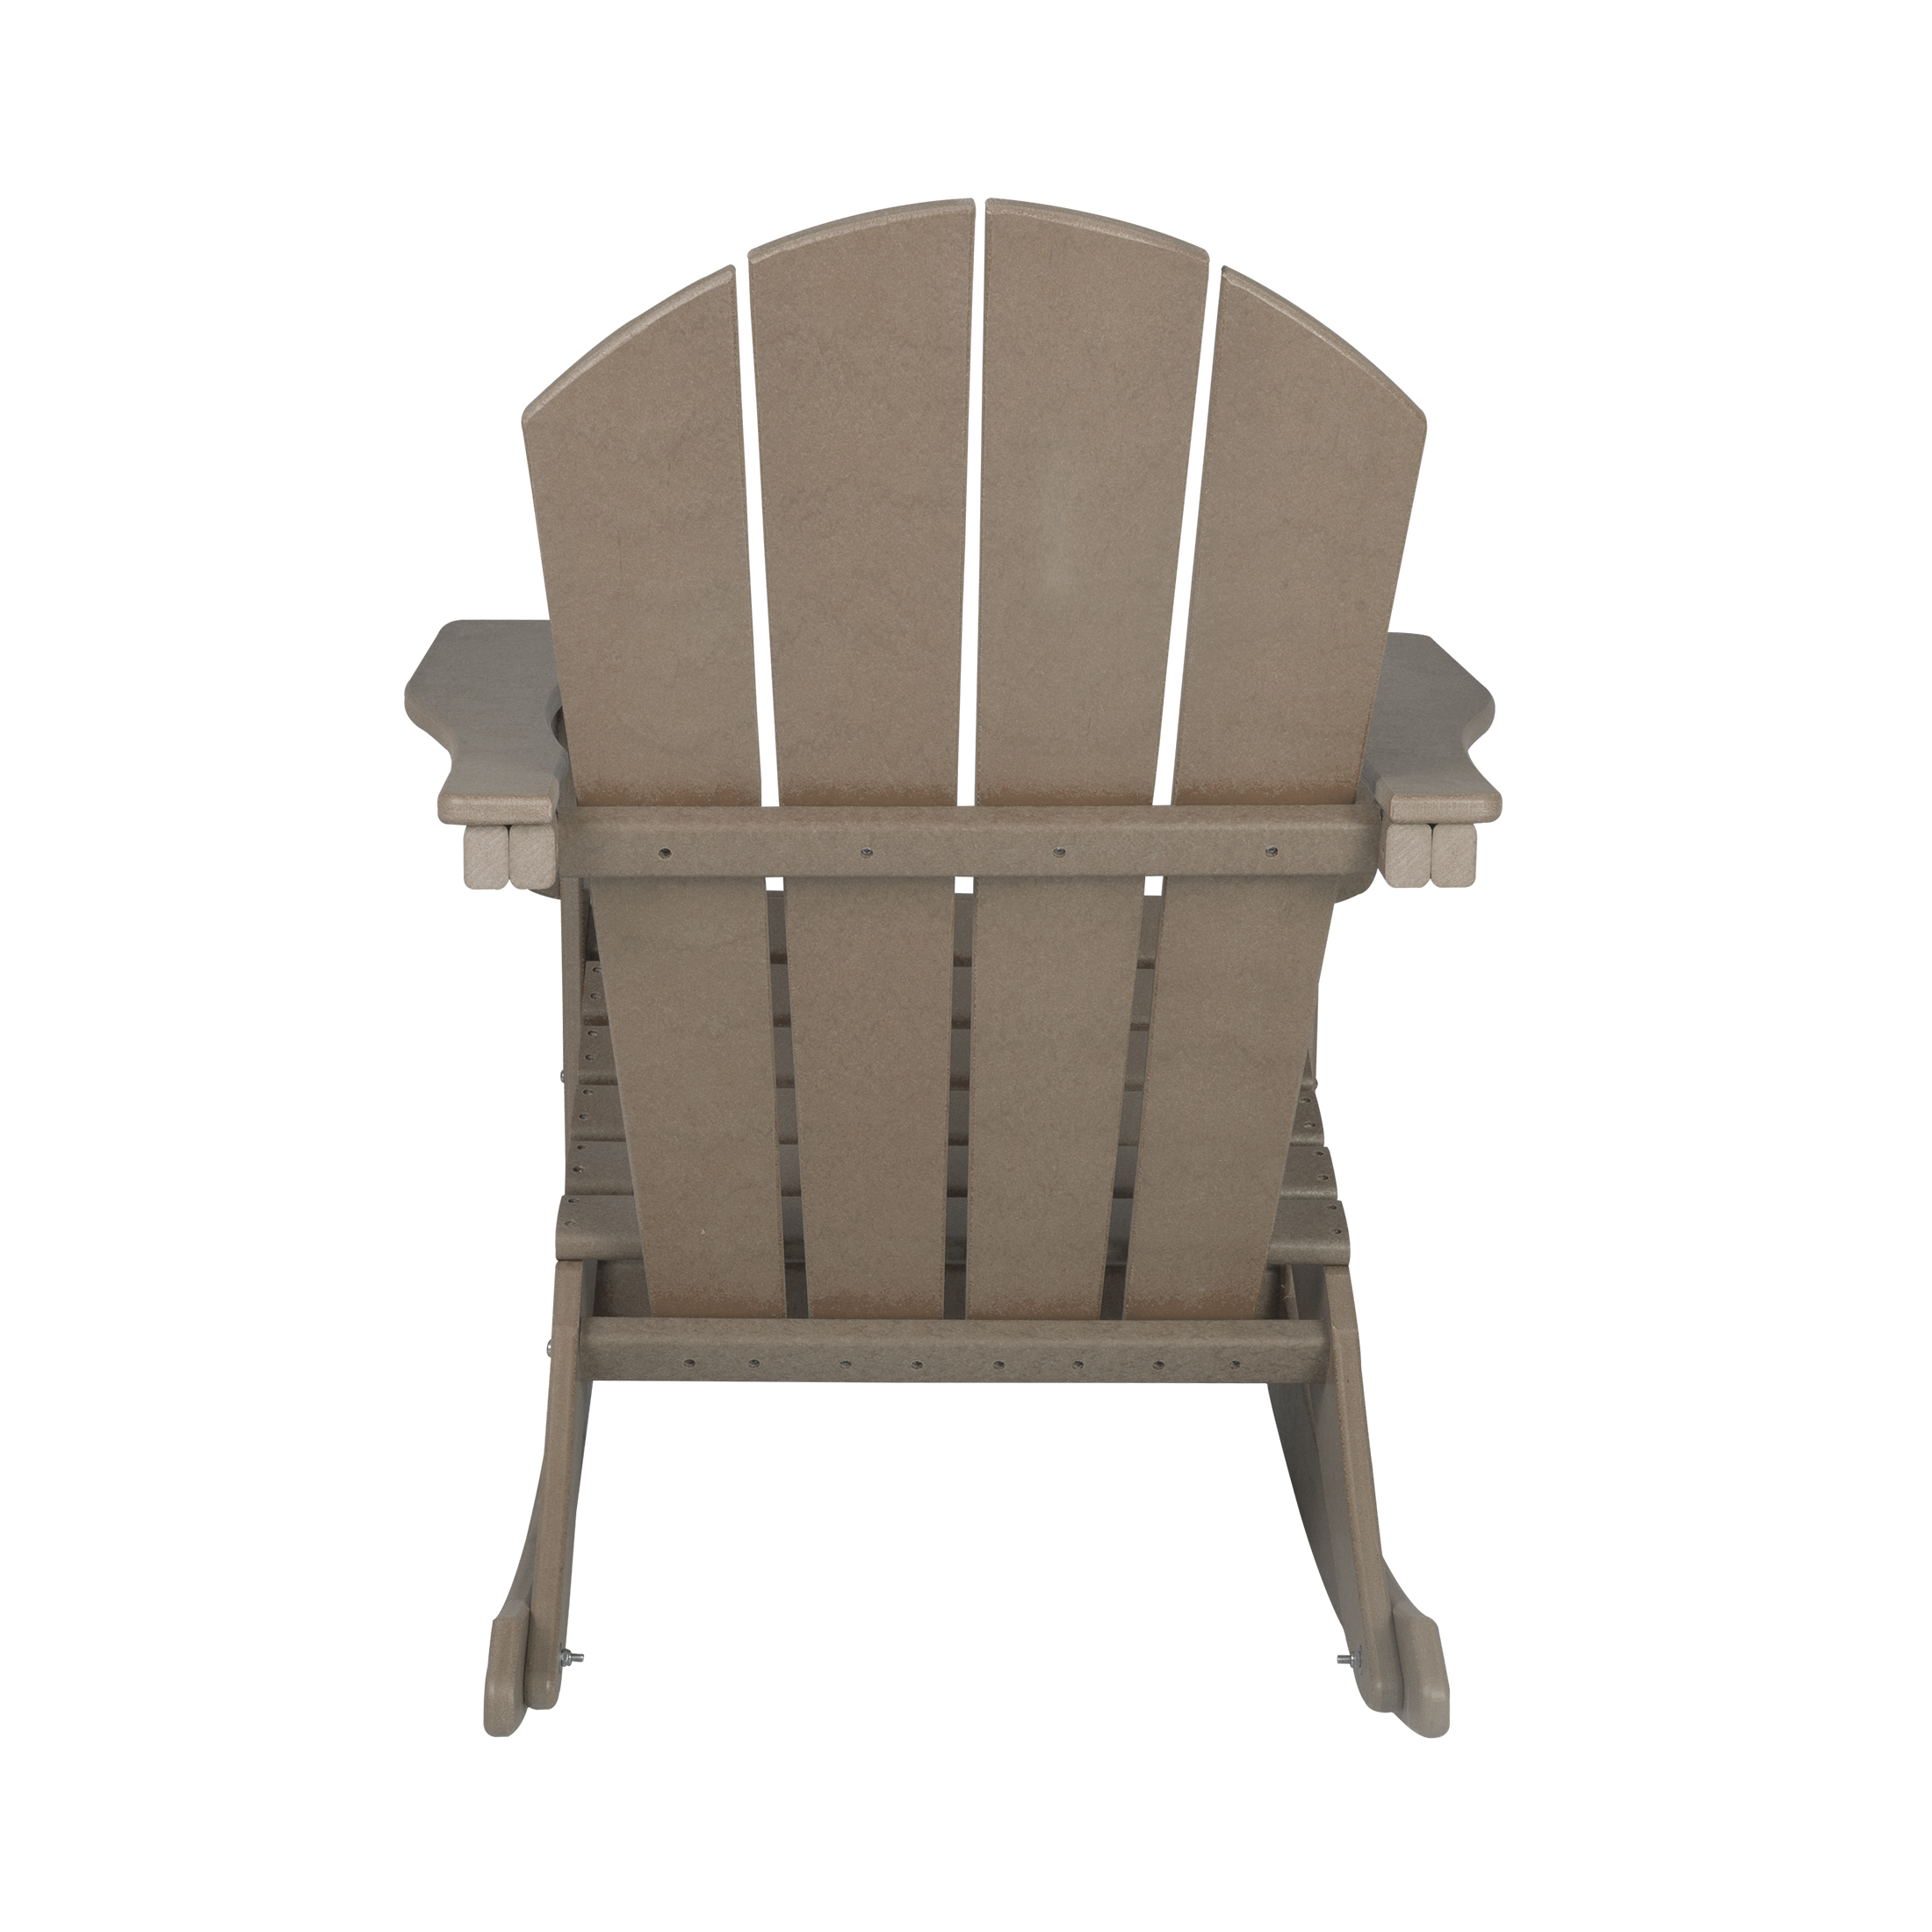 GARDEN Plastic Adirondack Rocking Chair for Outdoor Patio Porch Seating, Weathered Wood - image 5 of 7